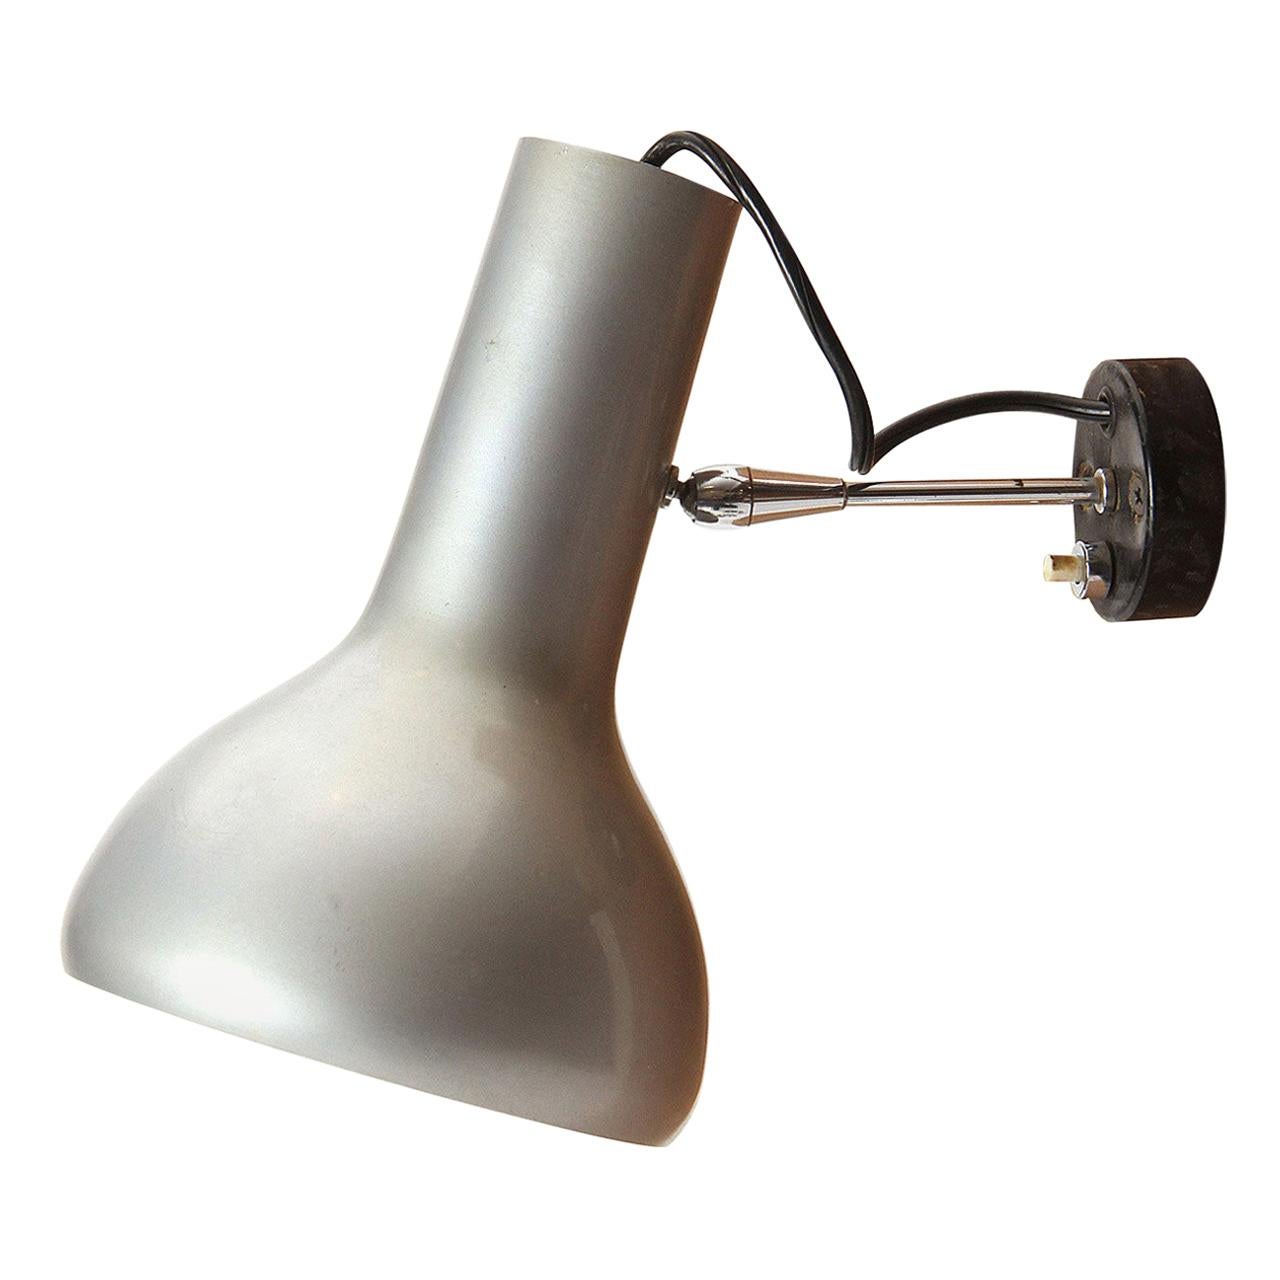 A pair of adjustable wall sconces having natural aluminum shades extending on a slim steel stem with a push-switch mount.